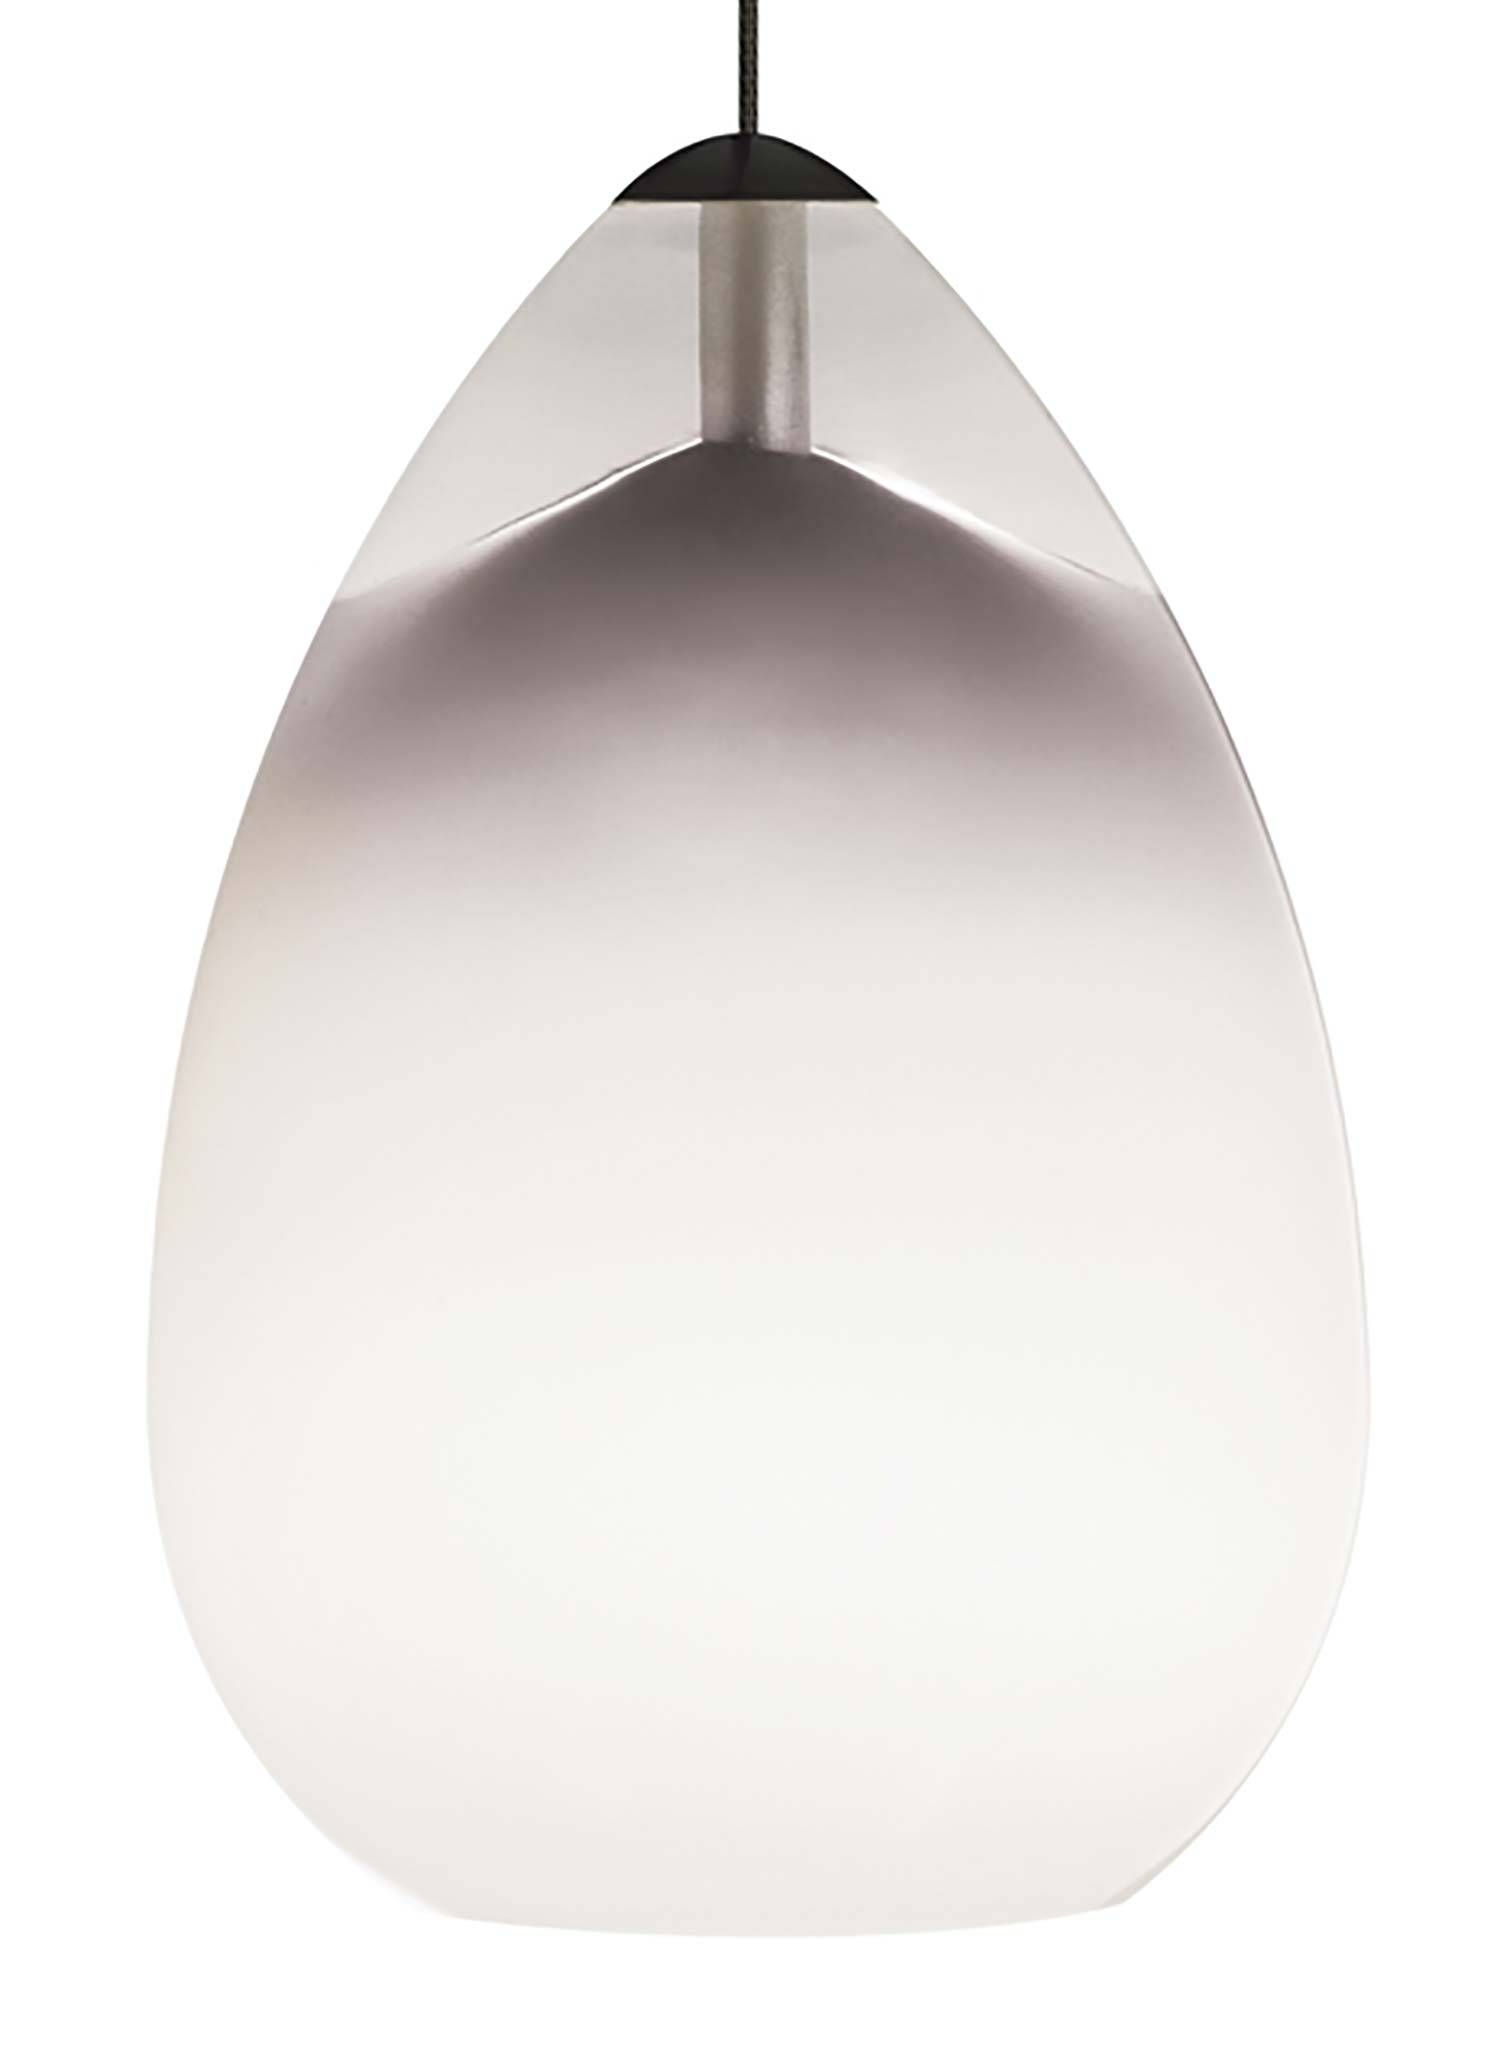 Tech Lighting 700mpaliw Alina Pendant Collection Low Voltage Throughout Tech Lighting Low Voltage Pendants (View 4 of 15)